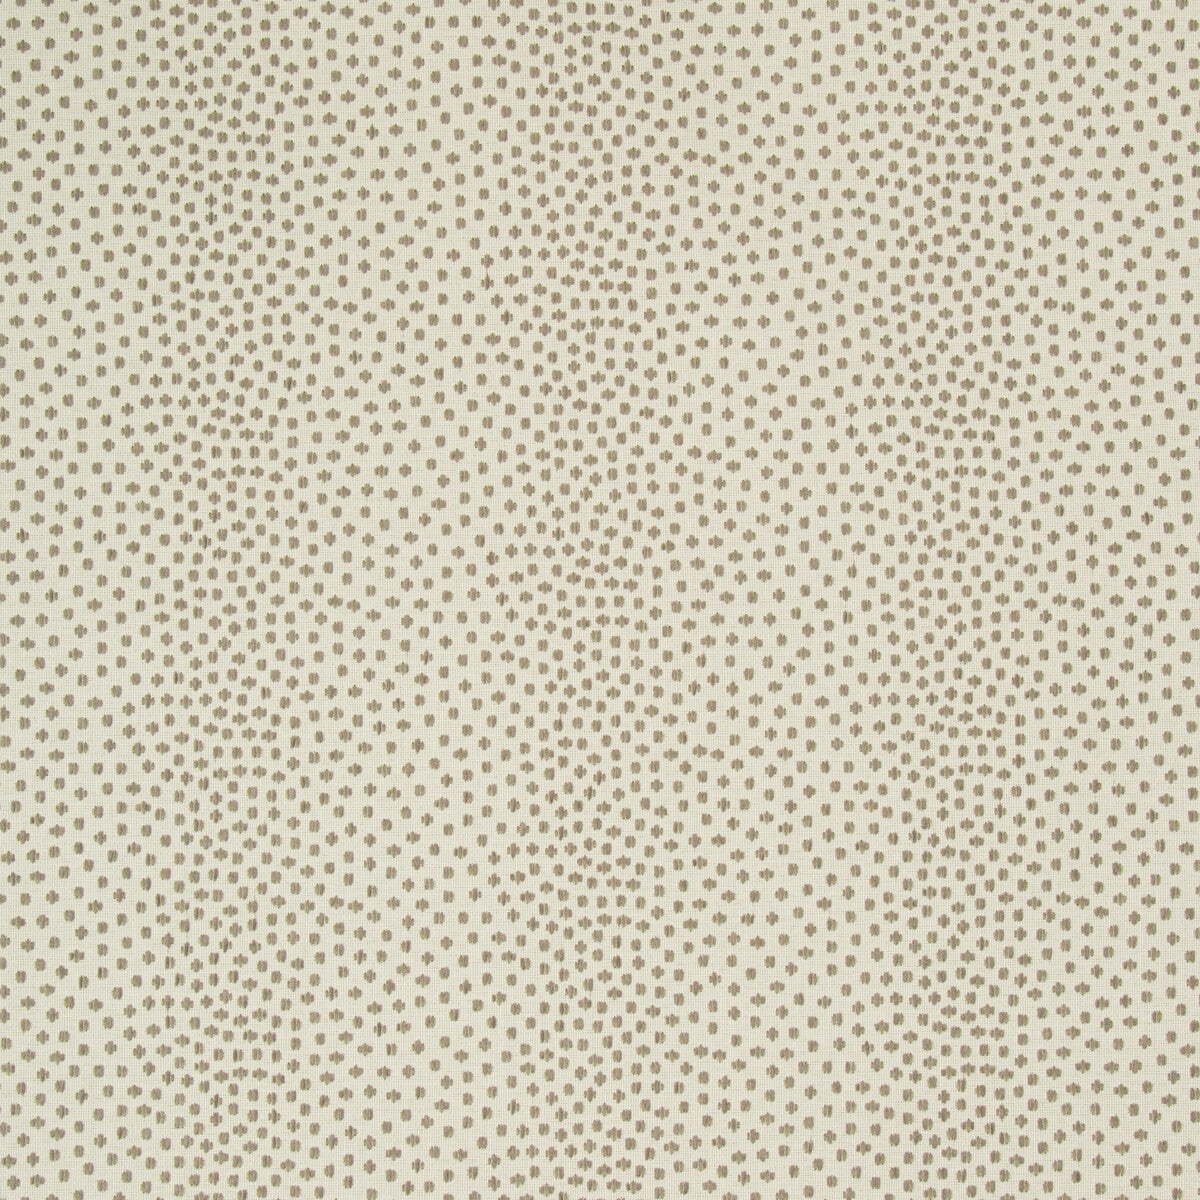 Kravet Contract fabric in 34748-11 color - pattern 34748.11.0 - by Kravet Contract in the Crypton Incase collection